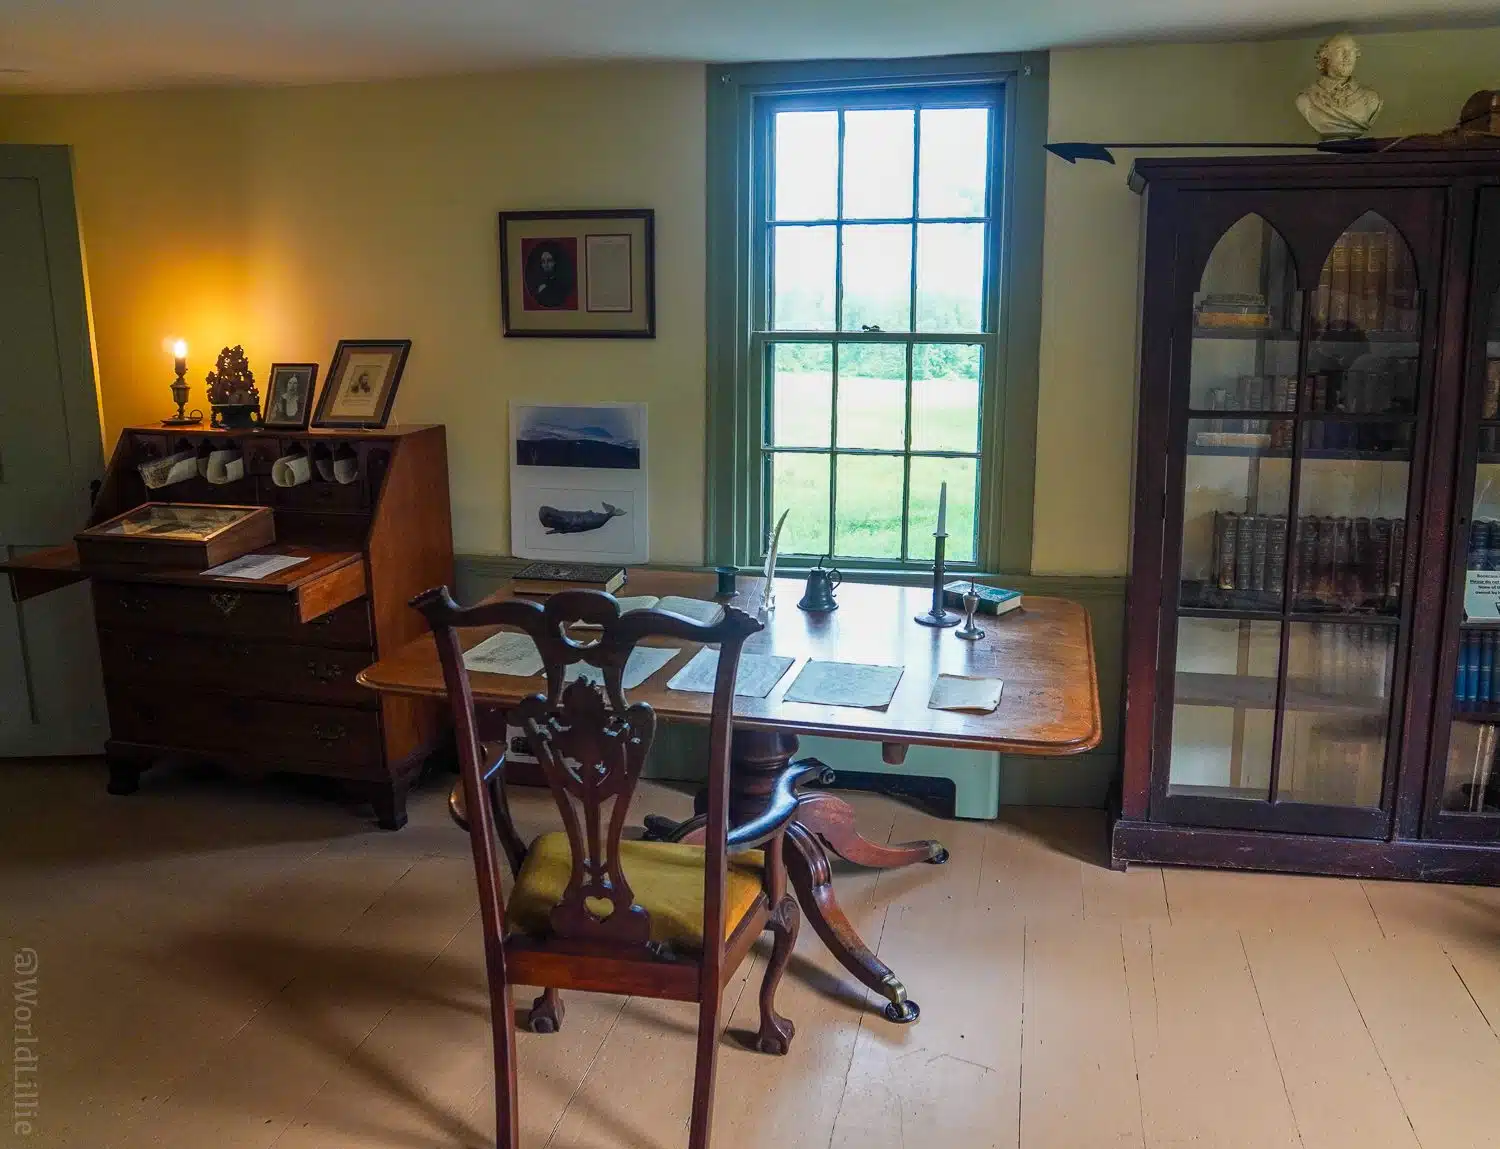 Herman Melville's study and desk.